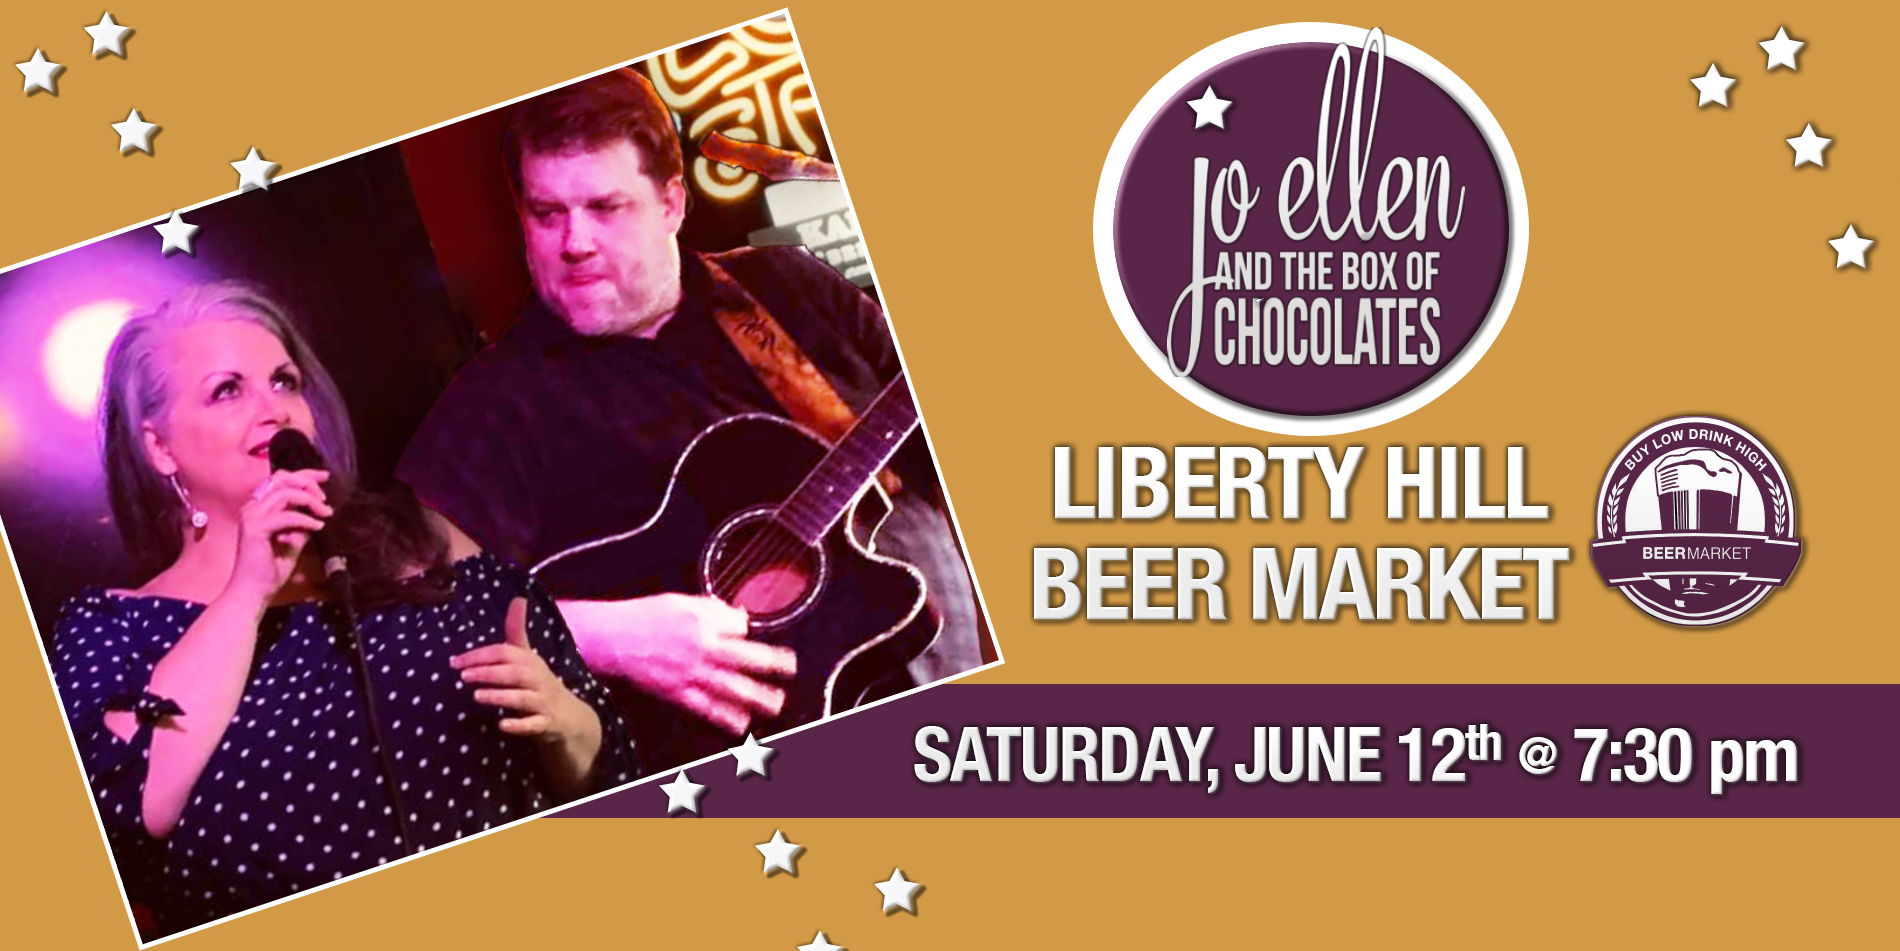 Jo Ellen and the Box of Chocolates at Liberty Hill Beer Market promotional image